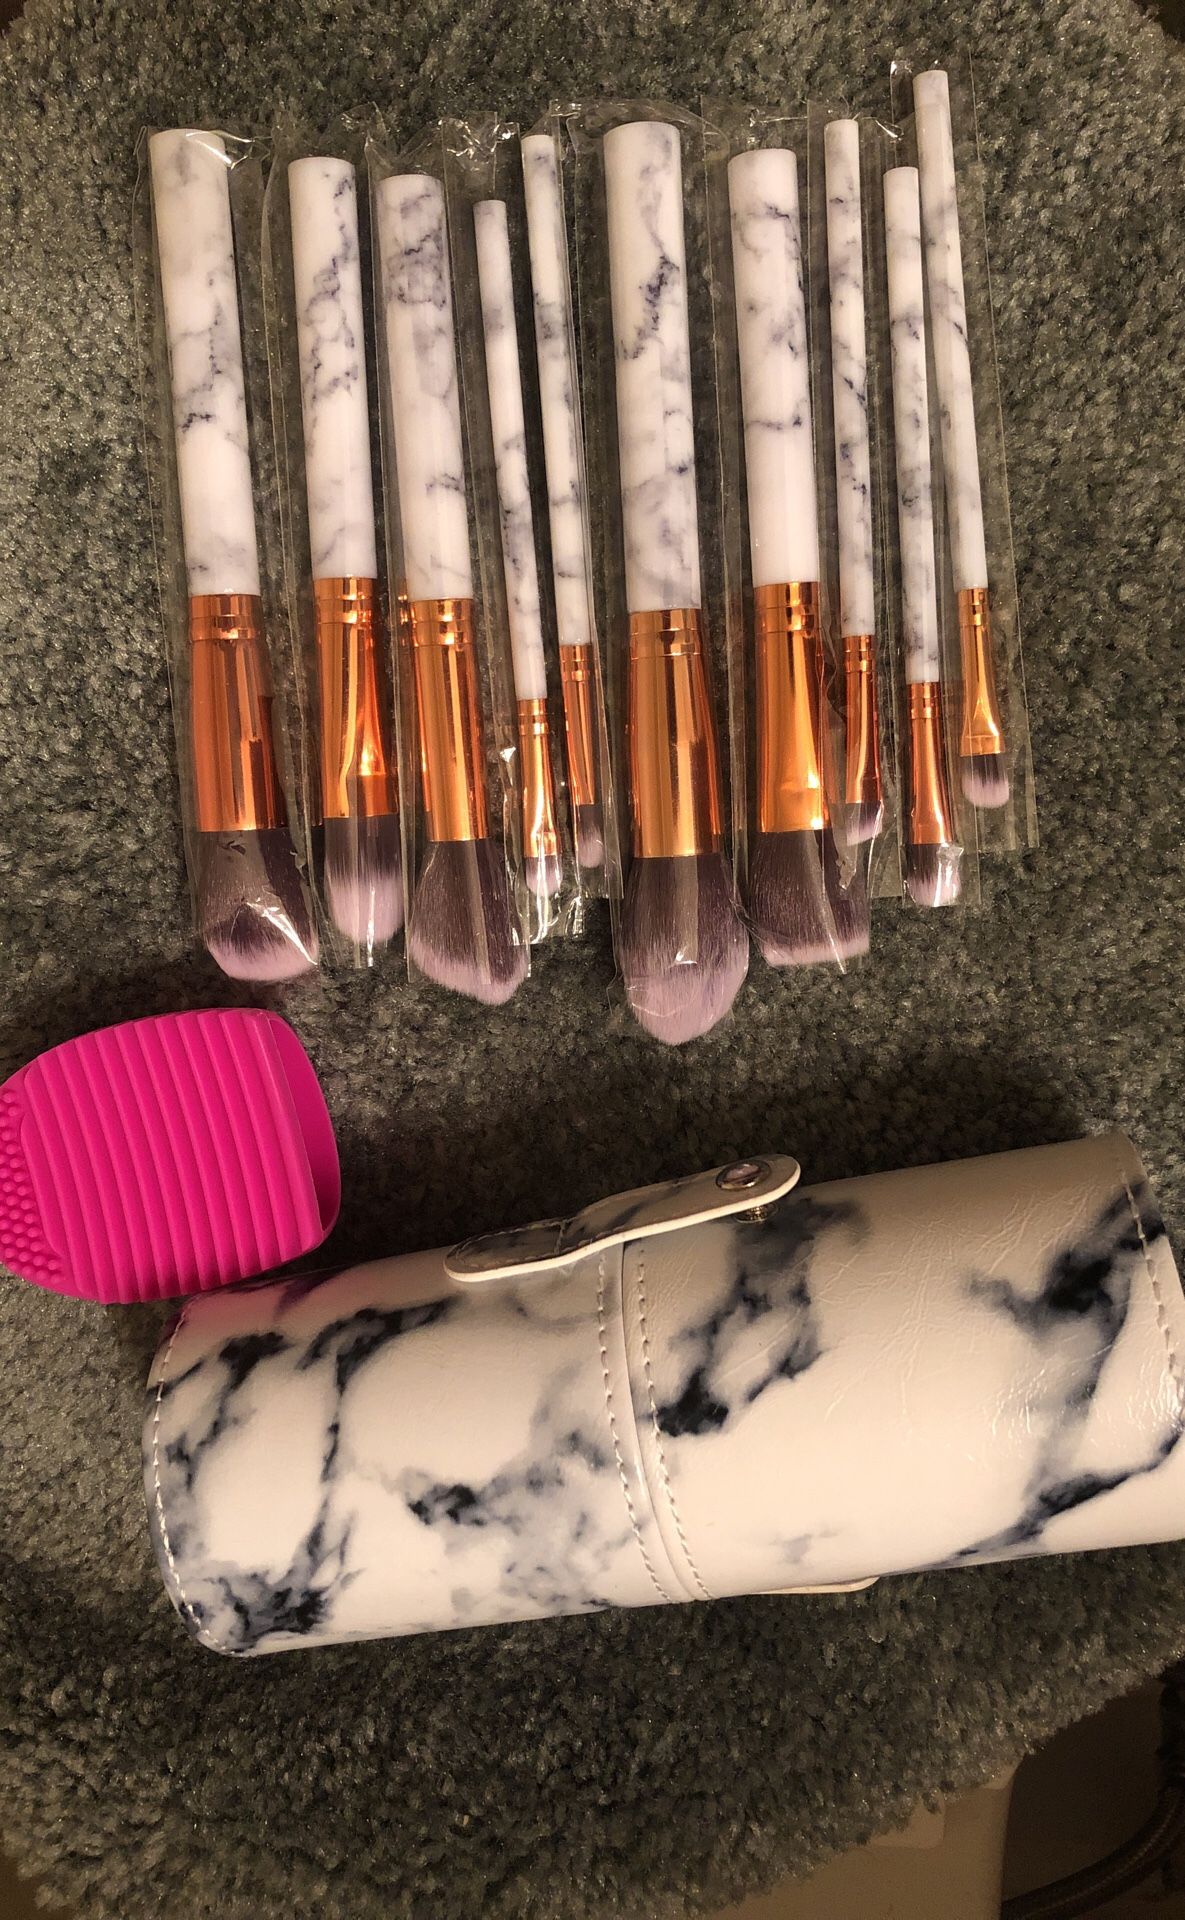 Makeup brush set of 9 with sponge cleaner